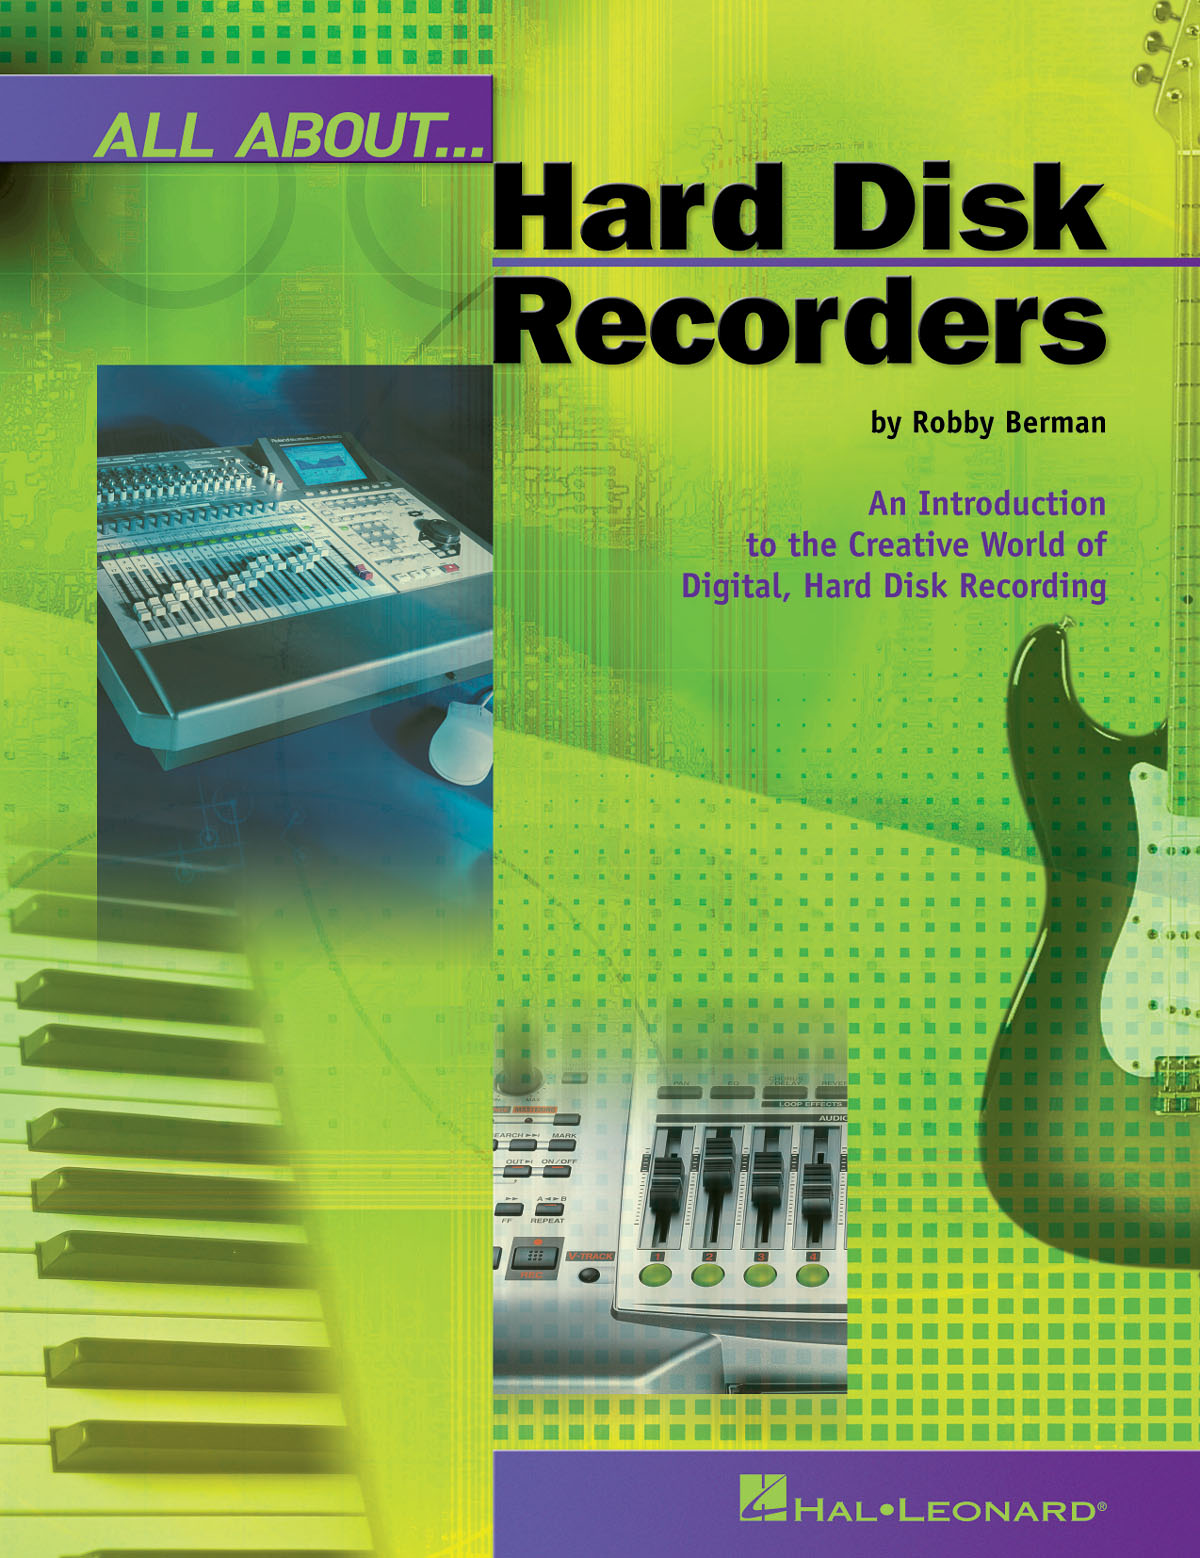 All About... Hard Disk Recorders